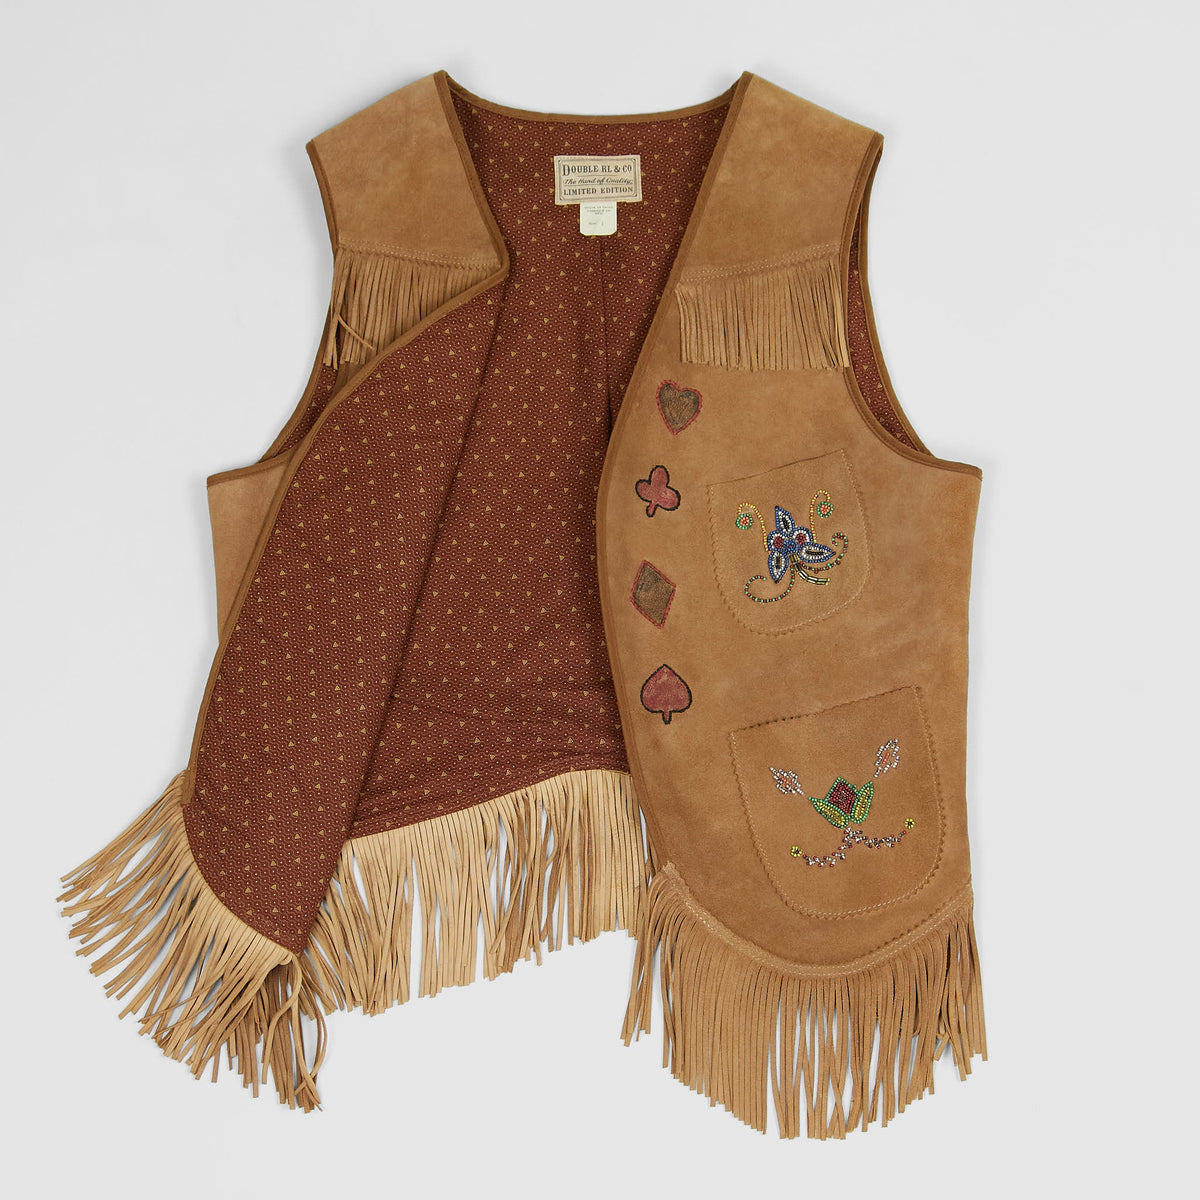 Double RL Ladies Limited Edition Hand Embroidered Leather Vests